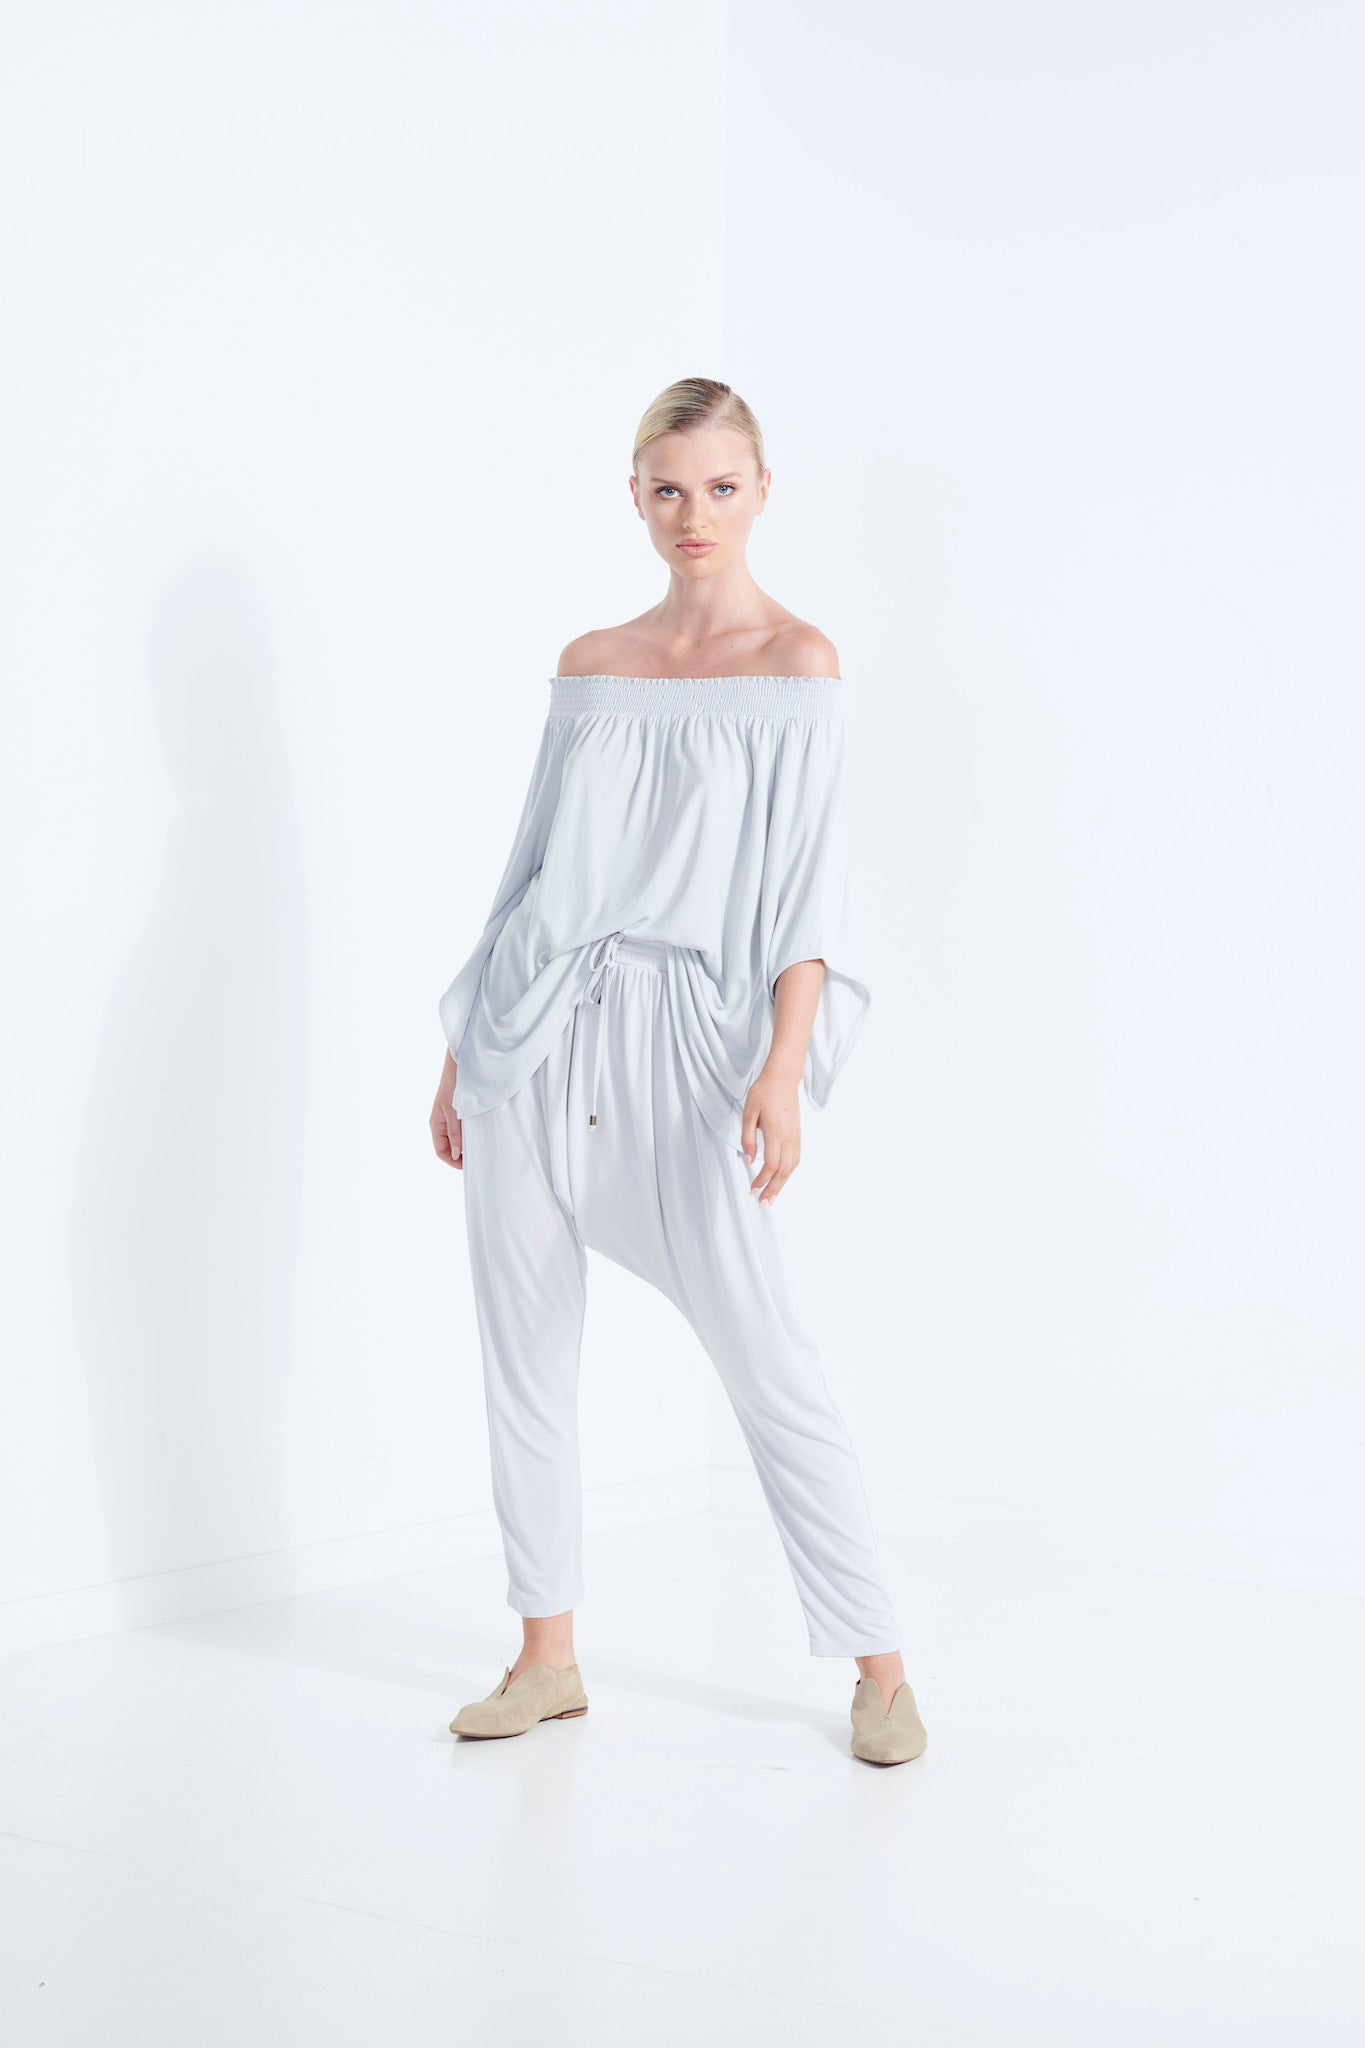 NAEVIA OFF SHOULDER TOP KNIT BEECHWOOD MODAL ELASTIC TOP WITH BELL SLEEVE WISP PALE ASHED GREY MOVEMENT VIEW